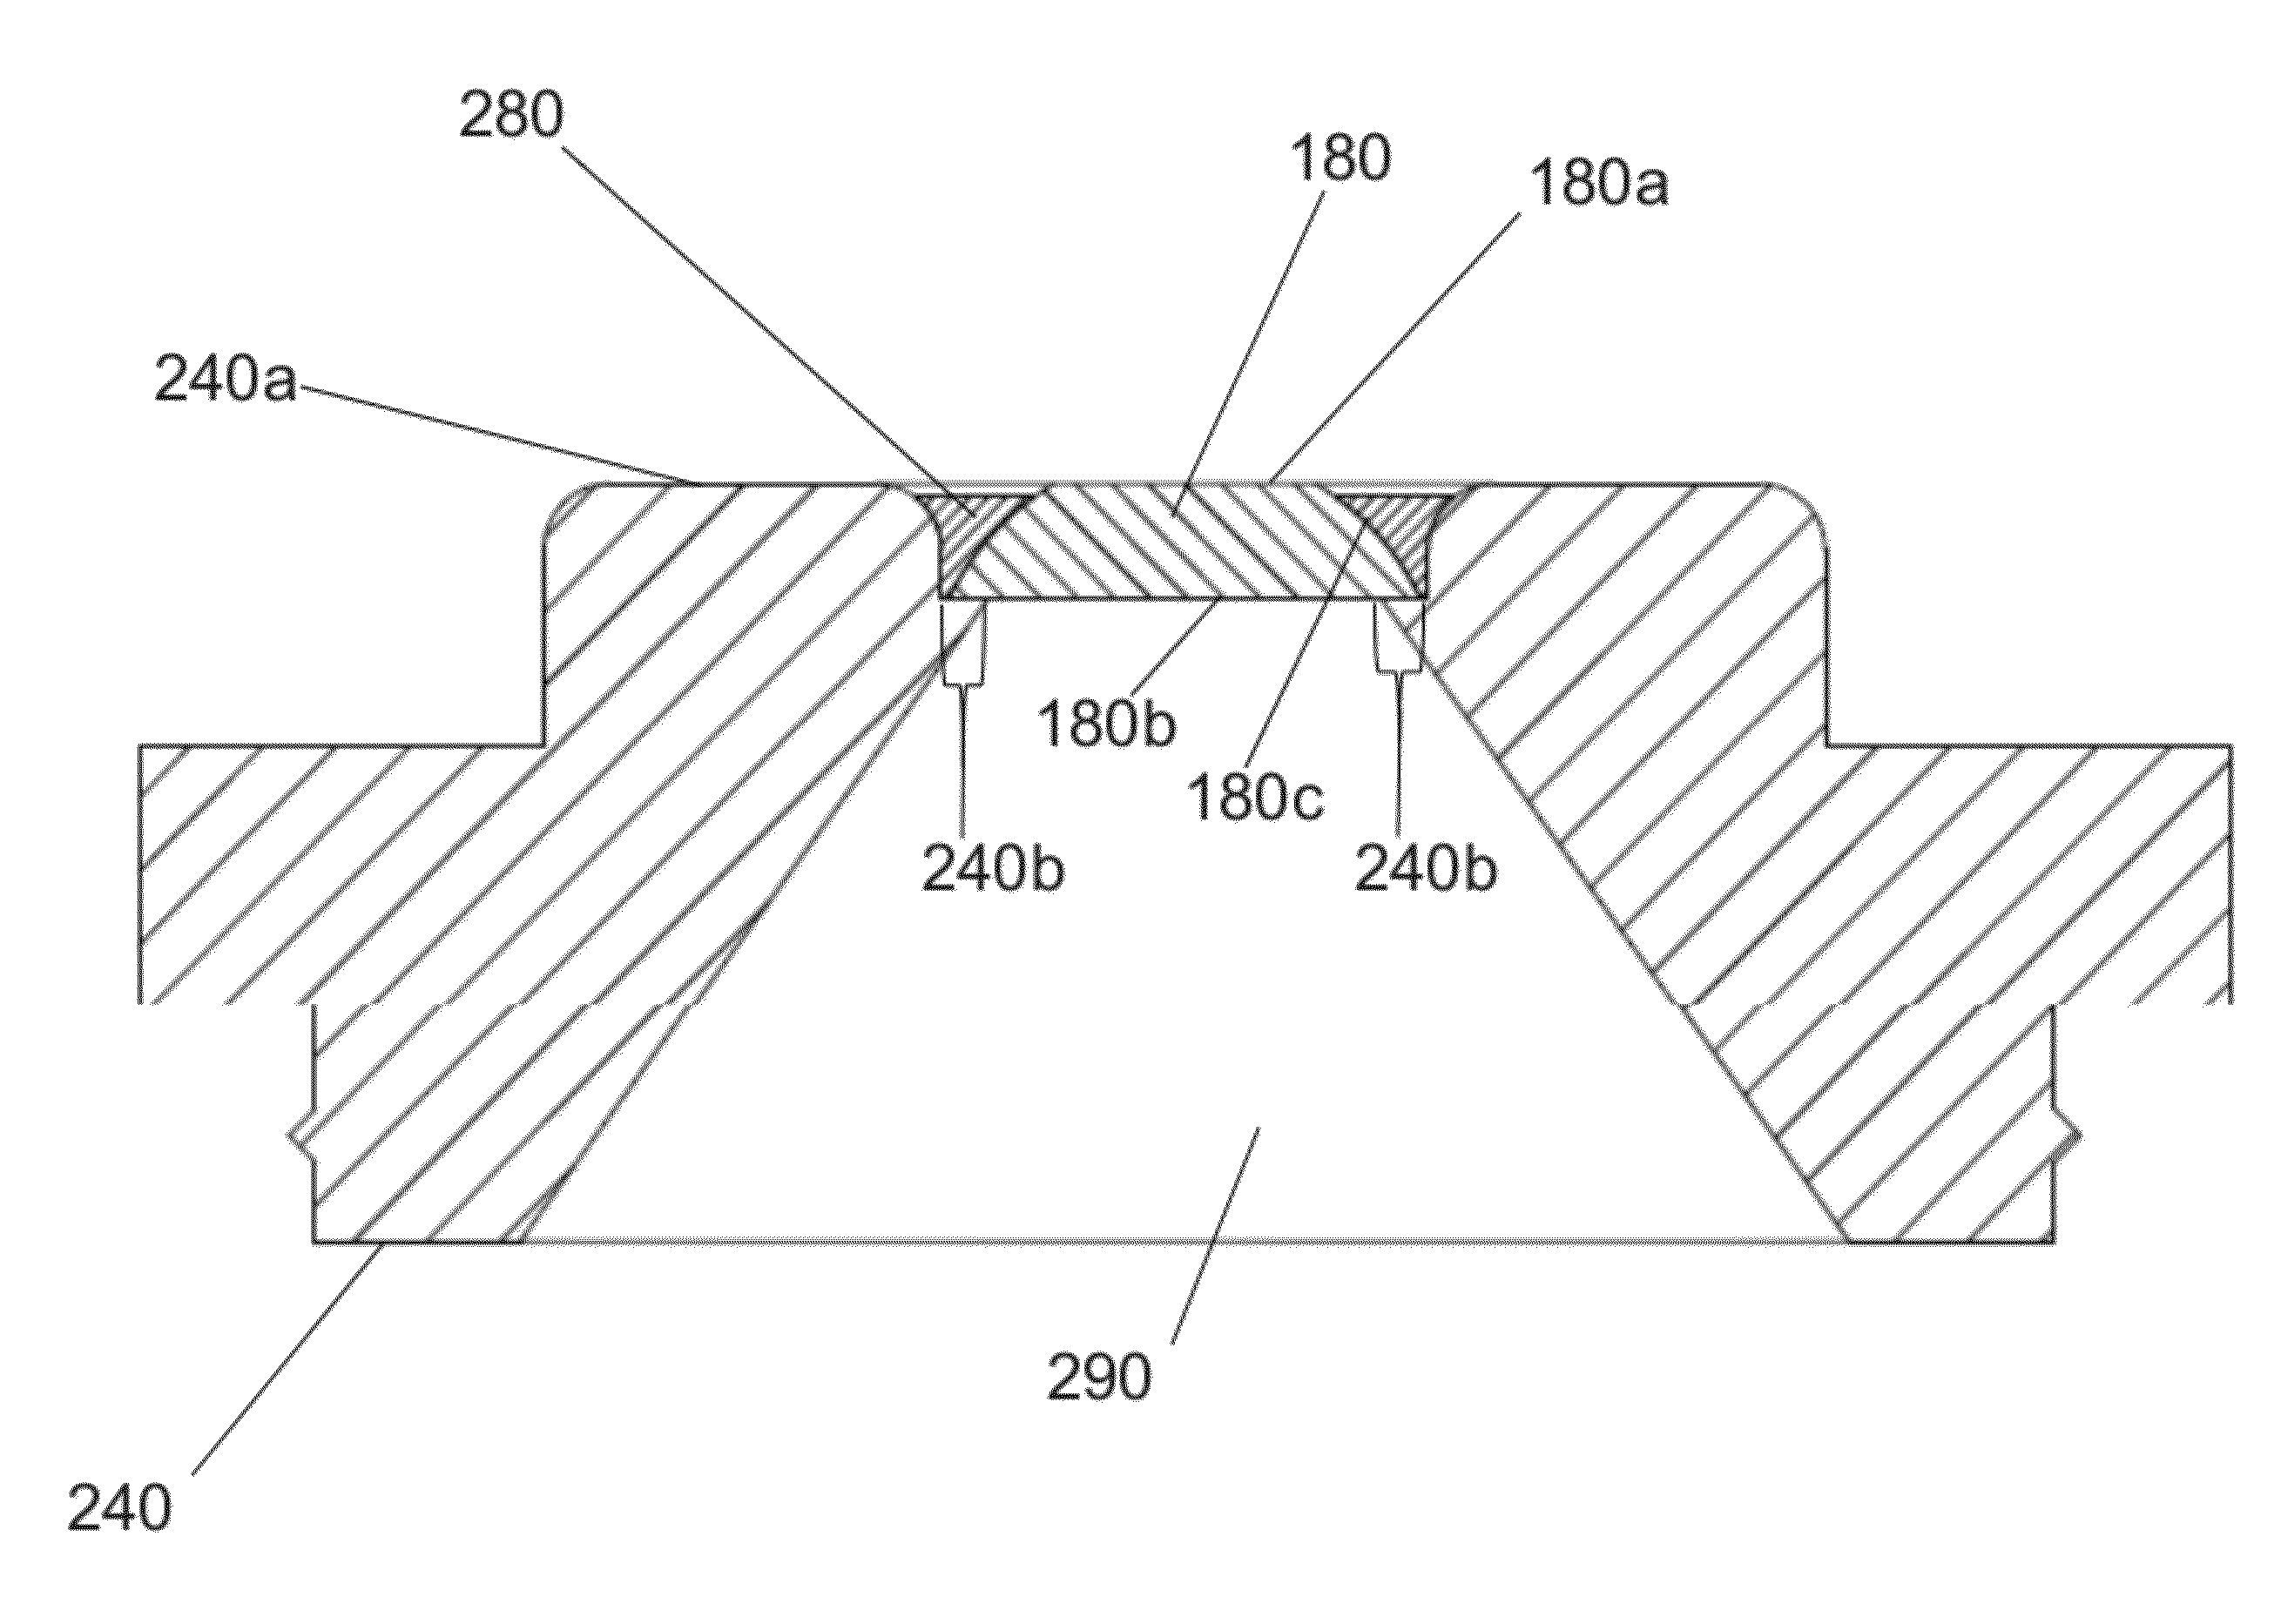 Apparatus for Stabilizing Mechanical, Thermal, and Optical Properties and for Reducing the Fluorescence of Biological Samples for Optical Evaluation